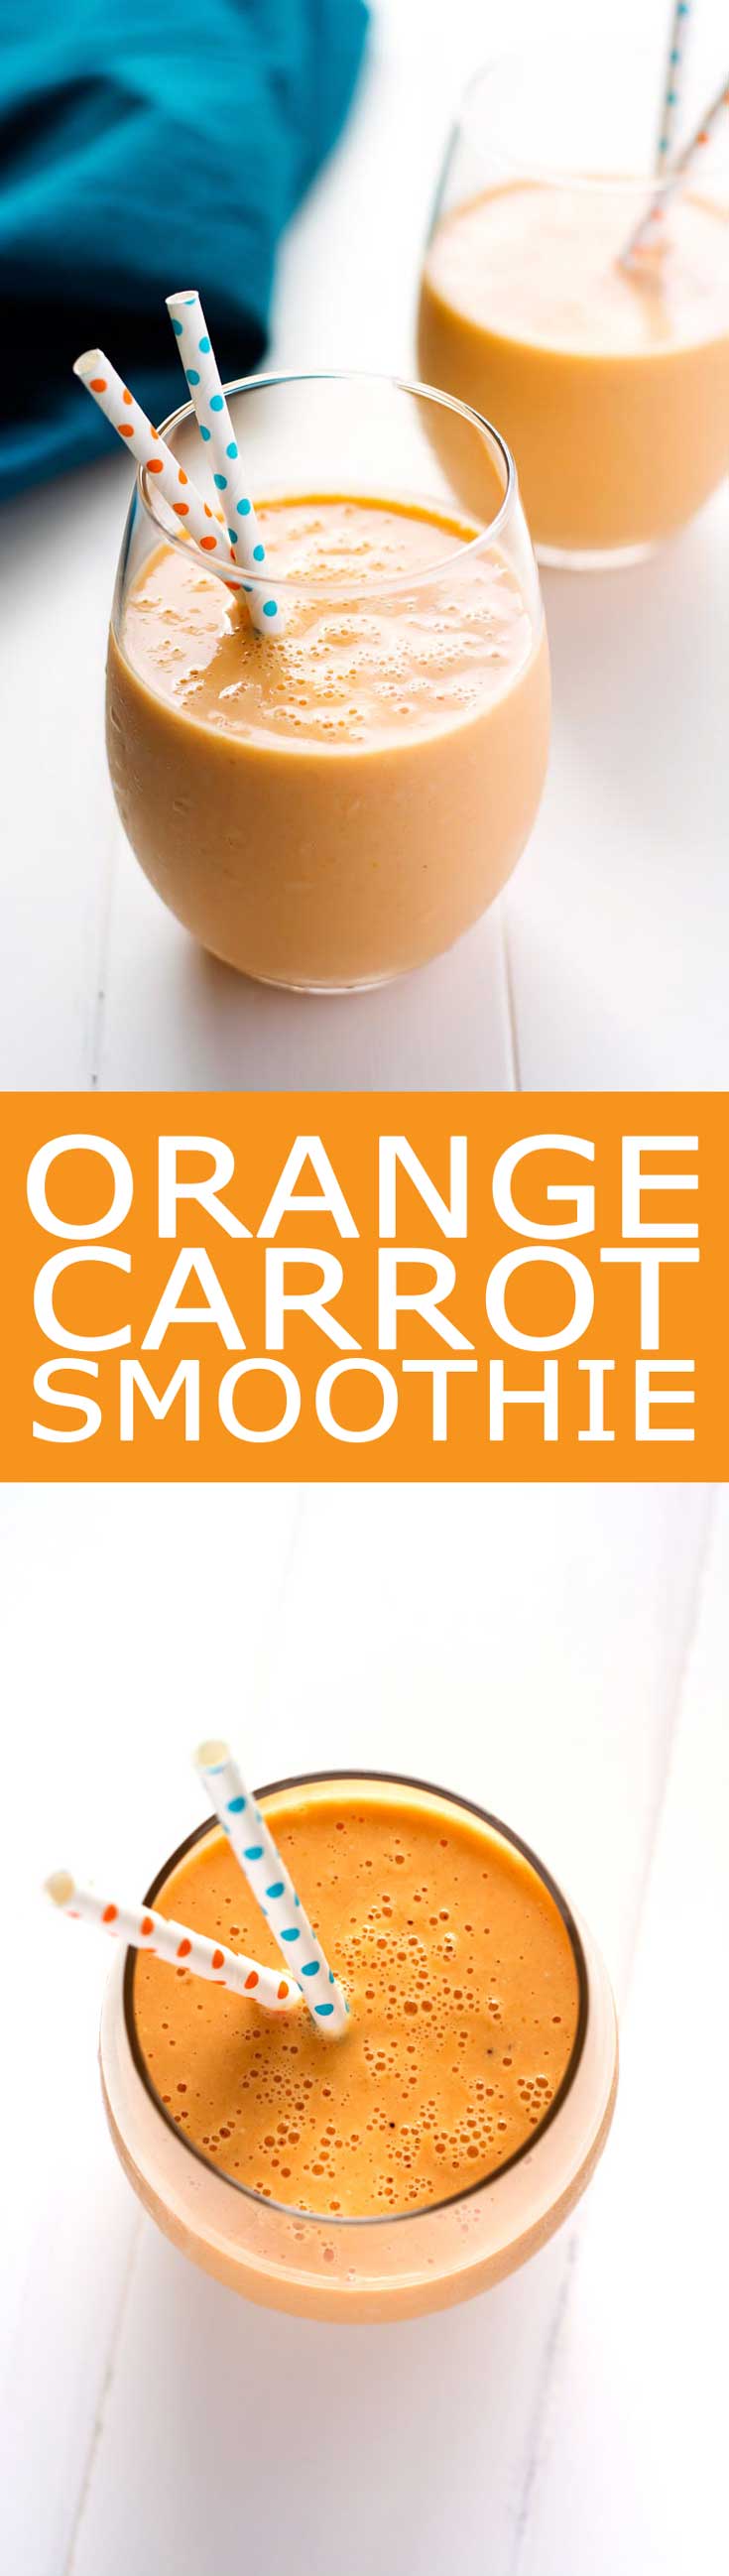 Healthy Orange Carrot Smoothie with pineapple, oats, Greek yogurt. Enjoy this for breakfast on busy mornings! #smoothies #smoothierecipes #healthysmoothies #breakfast #breakfastrecipes